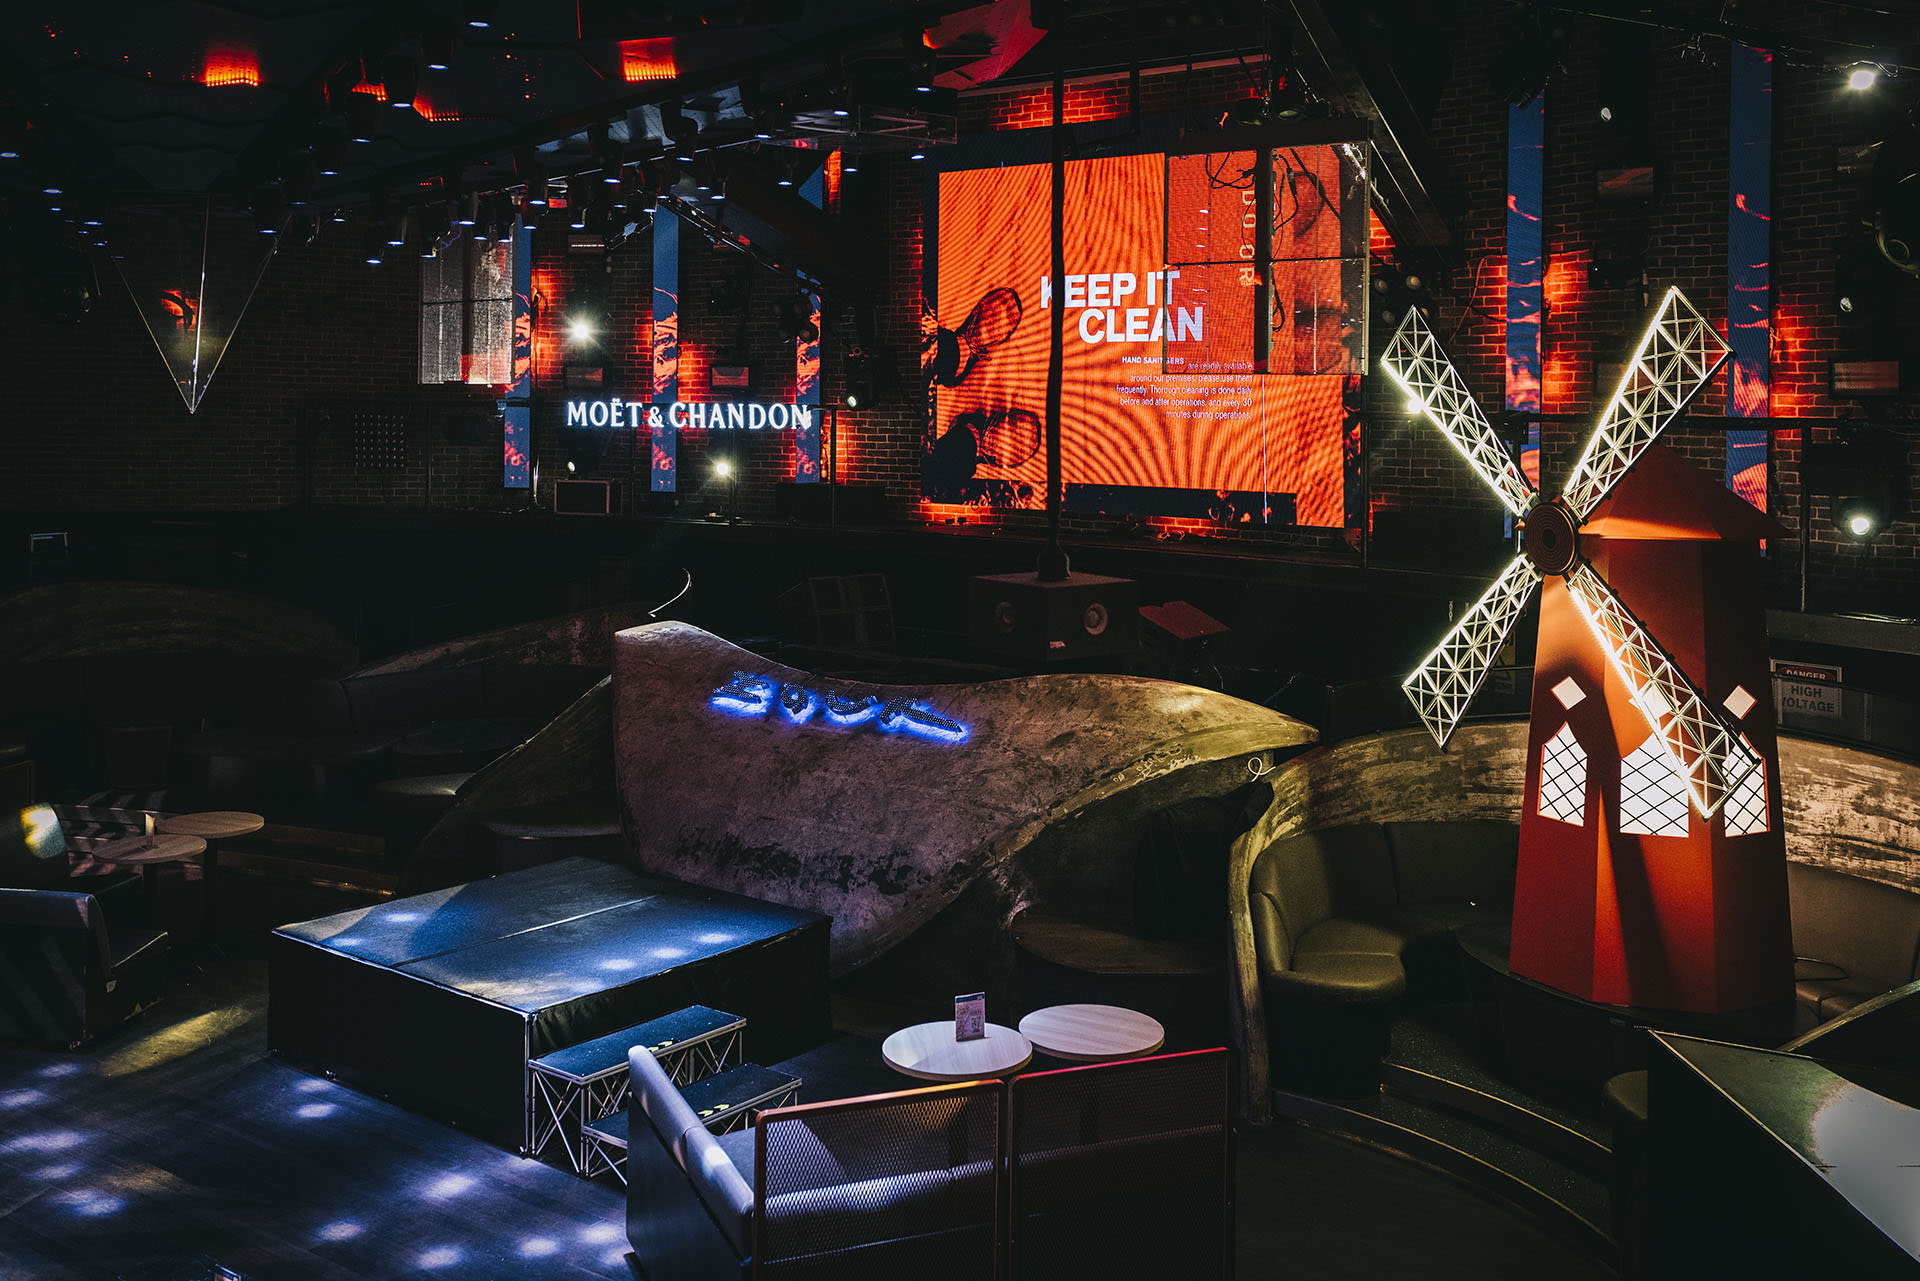 You Can Now Book A Table At Zouk To Watch A Movie, But You’ll Need TraceTogether To Enter